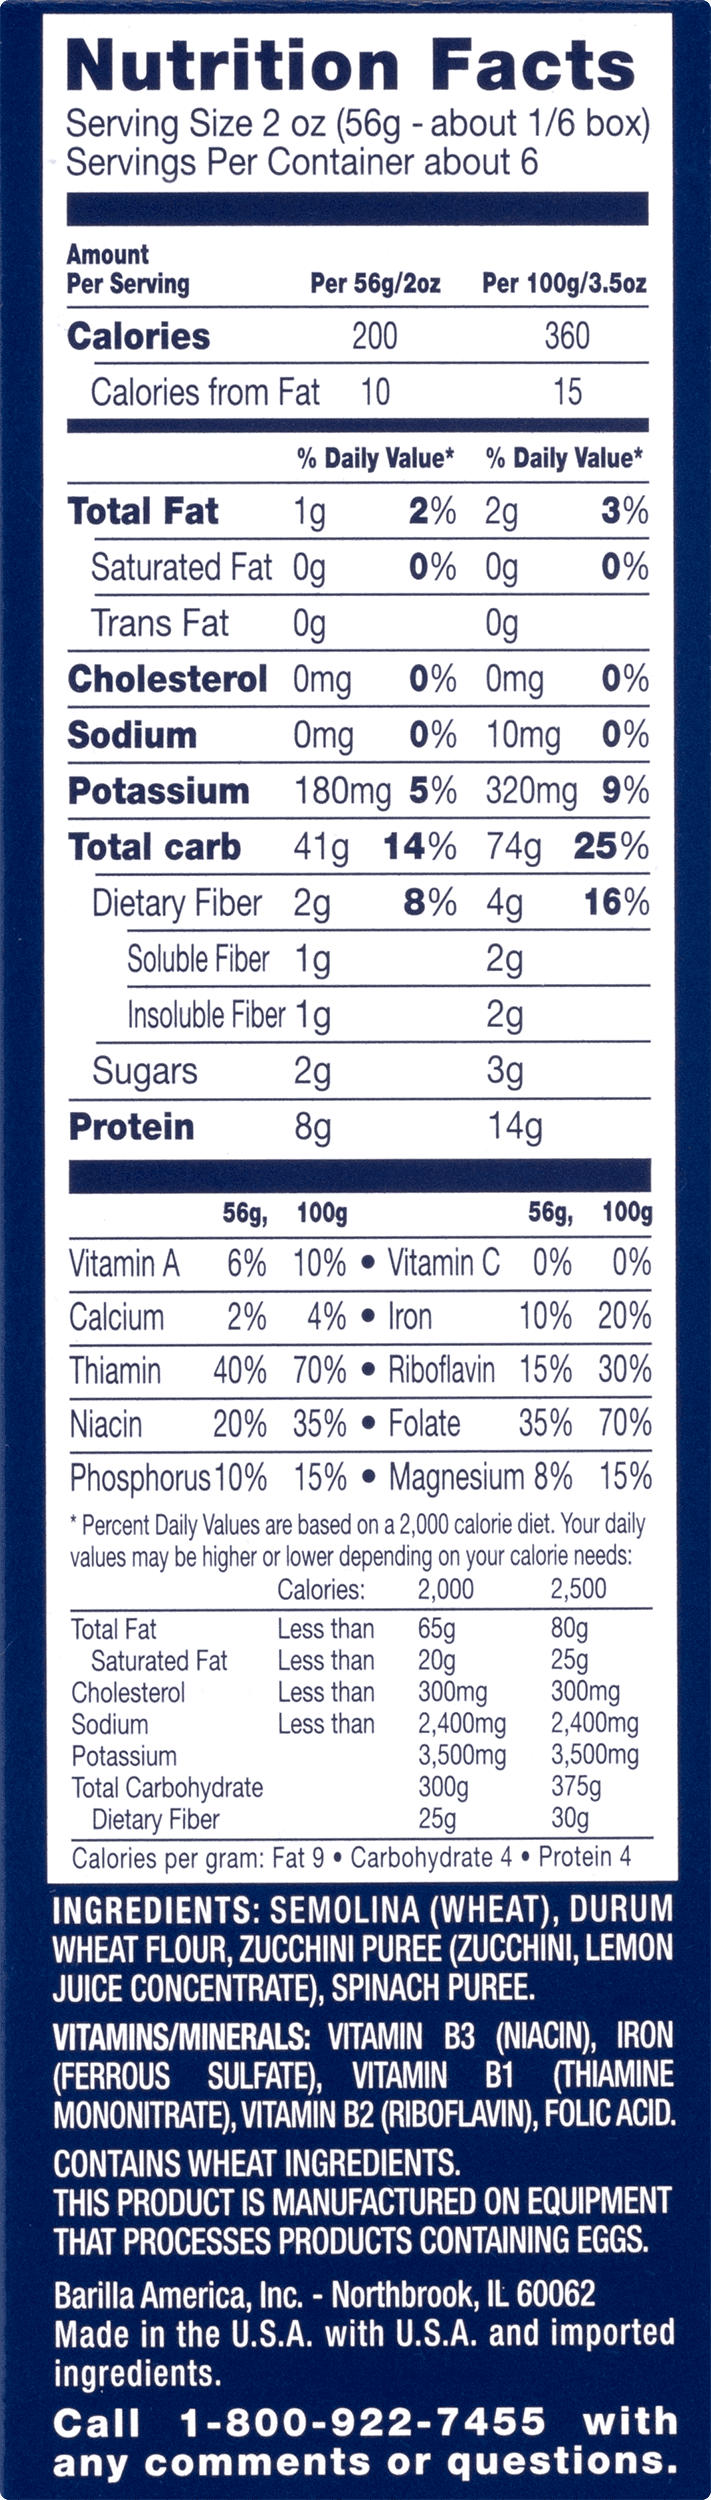 Pasta Nutrition Facts Label